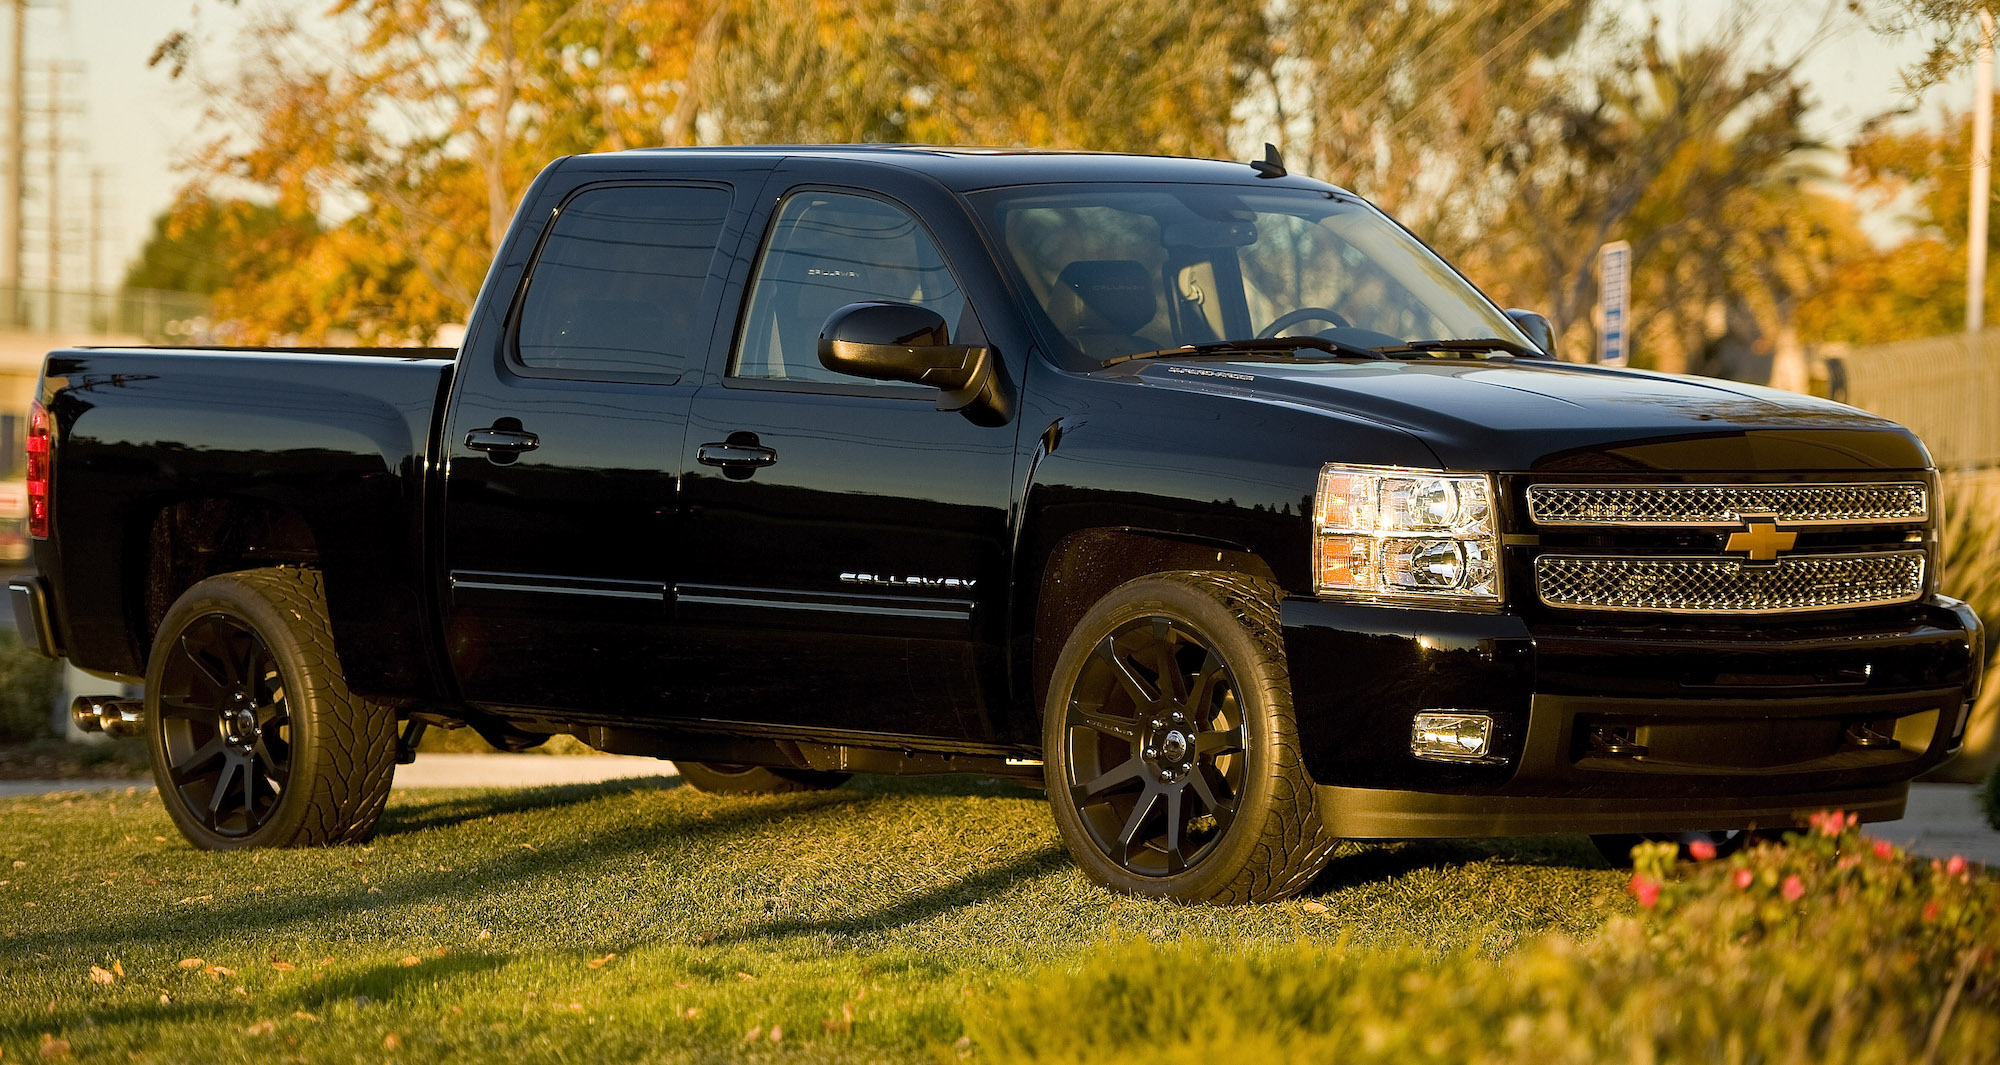 The Engines in Chevy Silverados Were 'Engineered to Fail,' Class Action